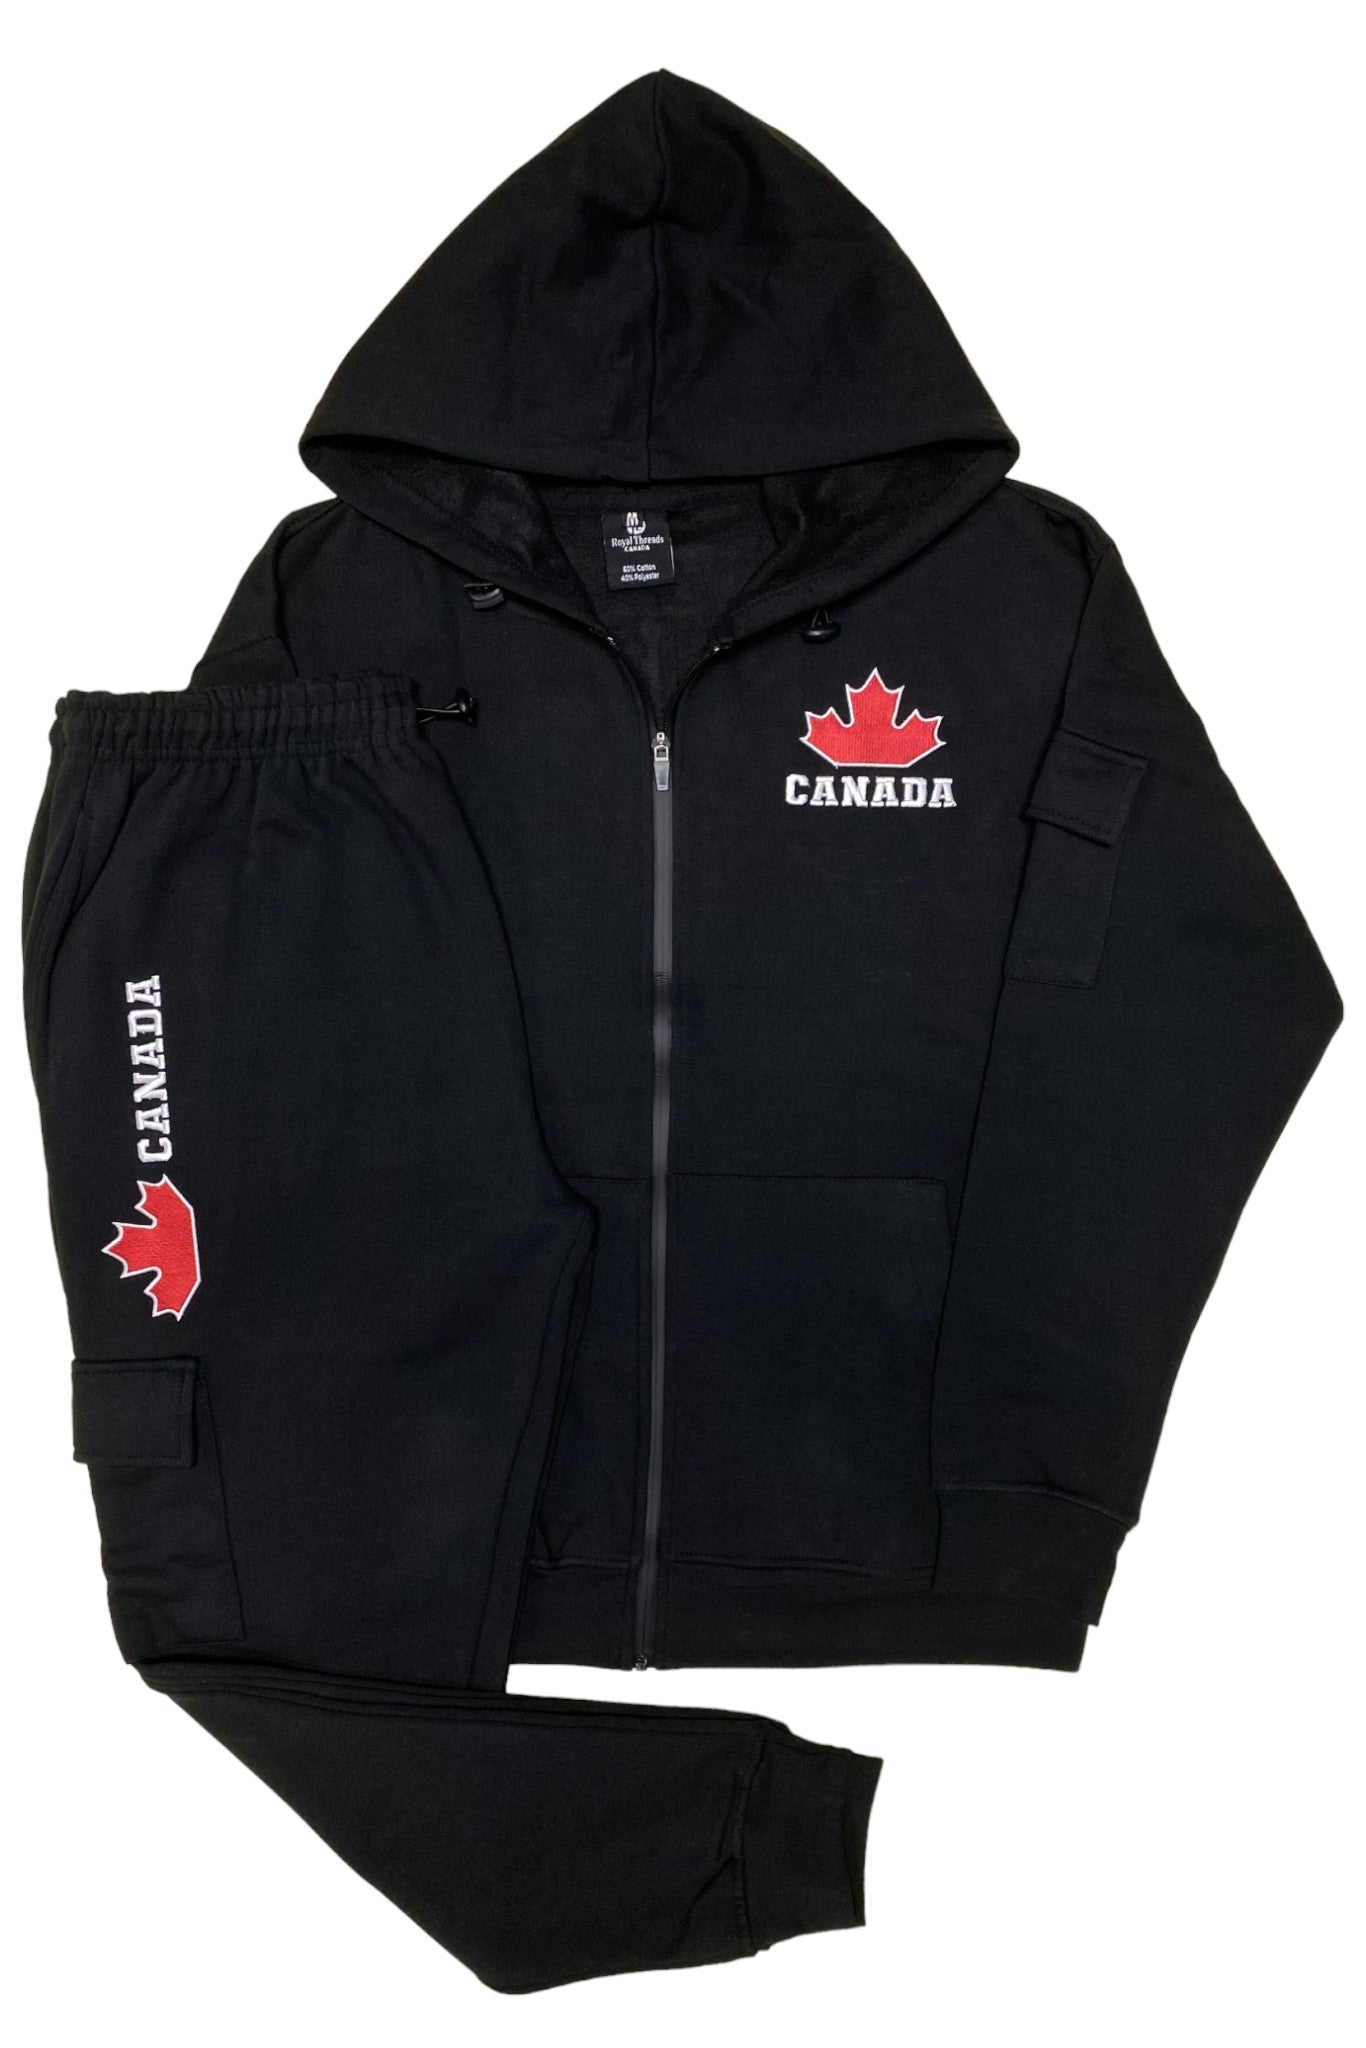 Men Fleece Jogger Canada Theme Sweatsuit with utility Cargo Pockets Outfit